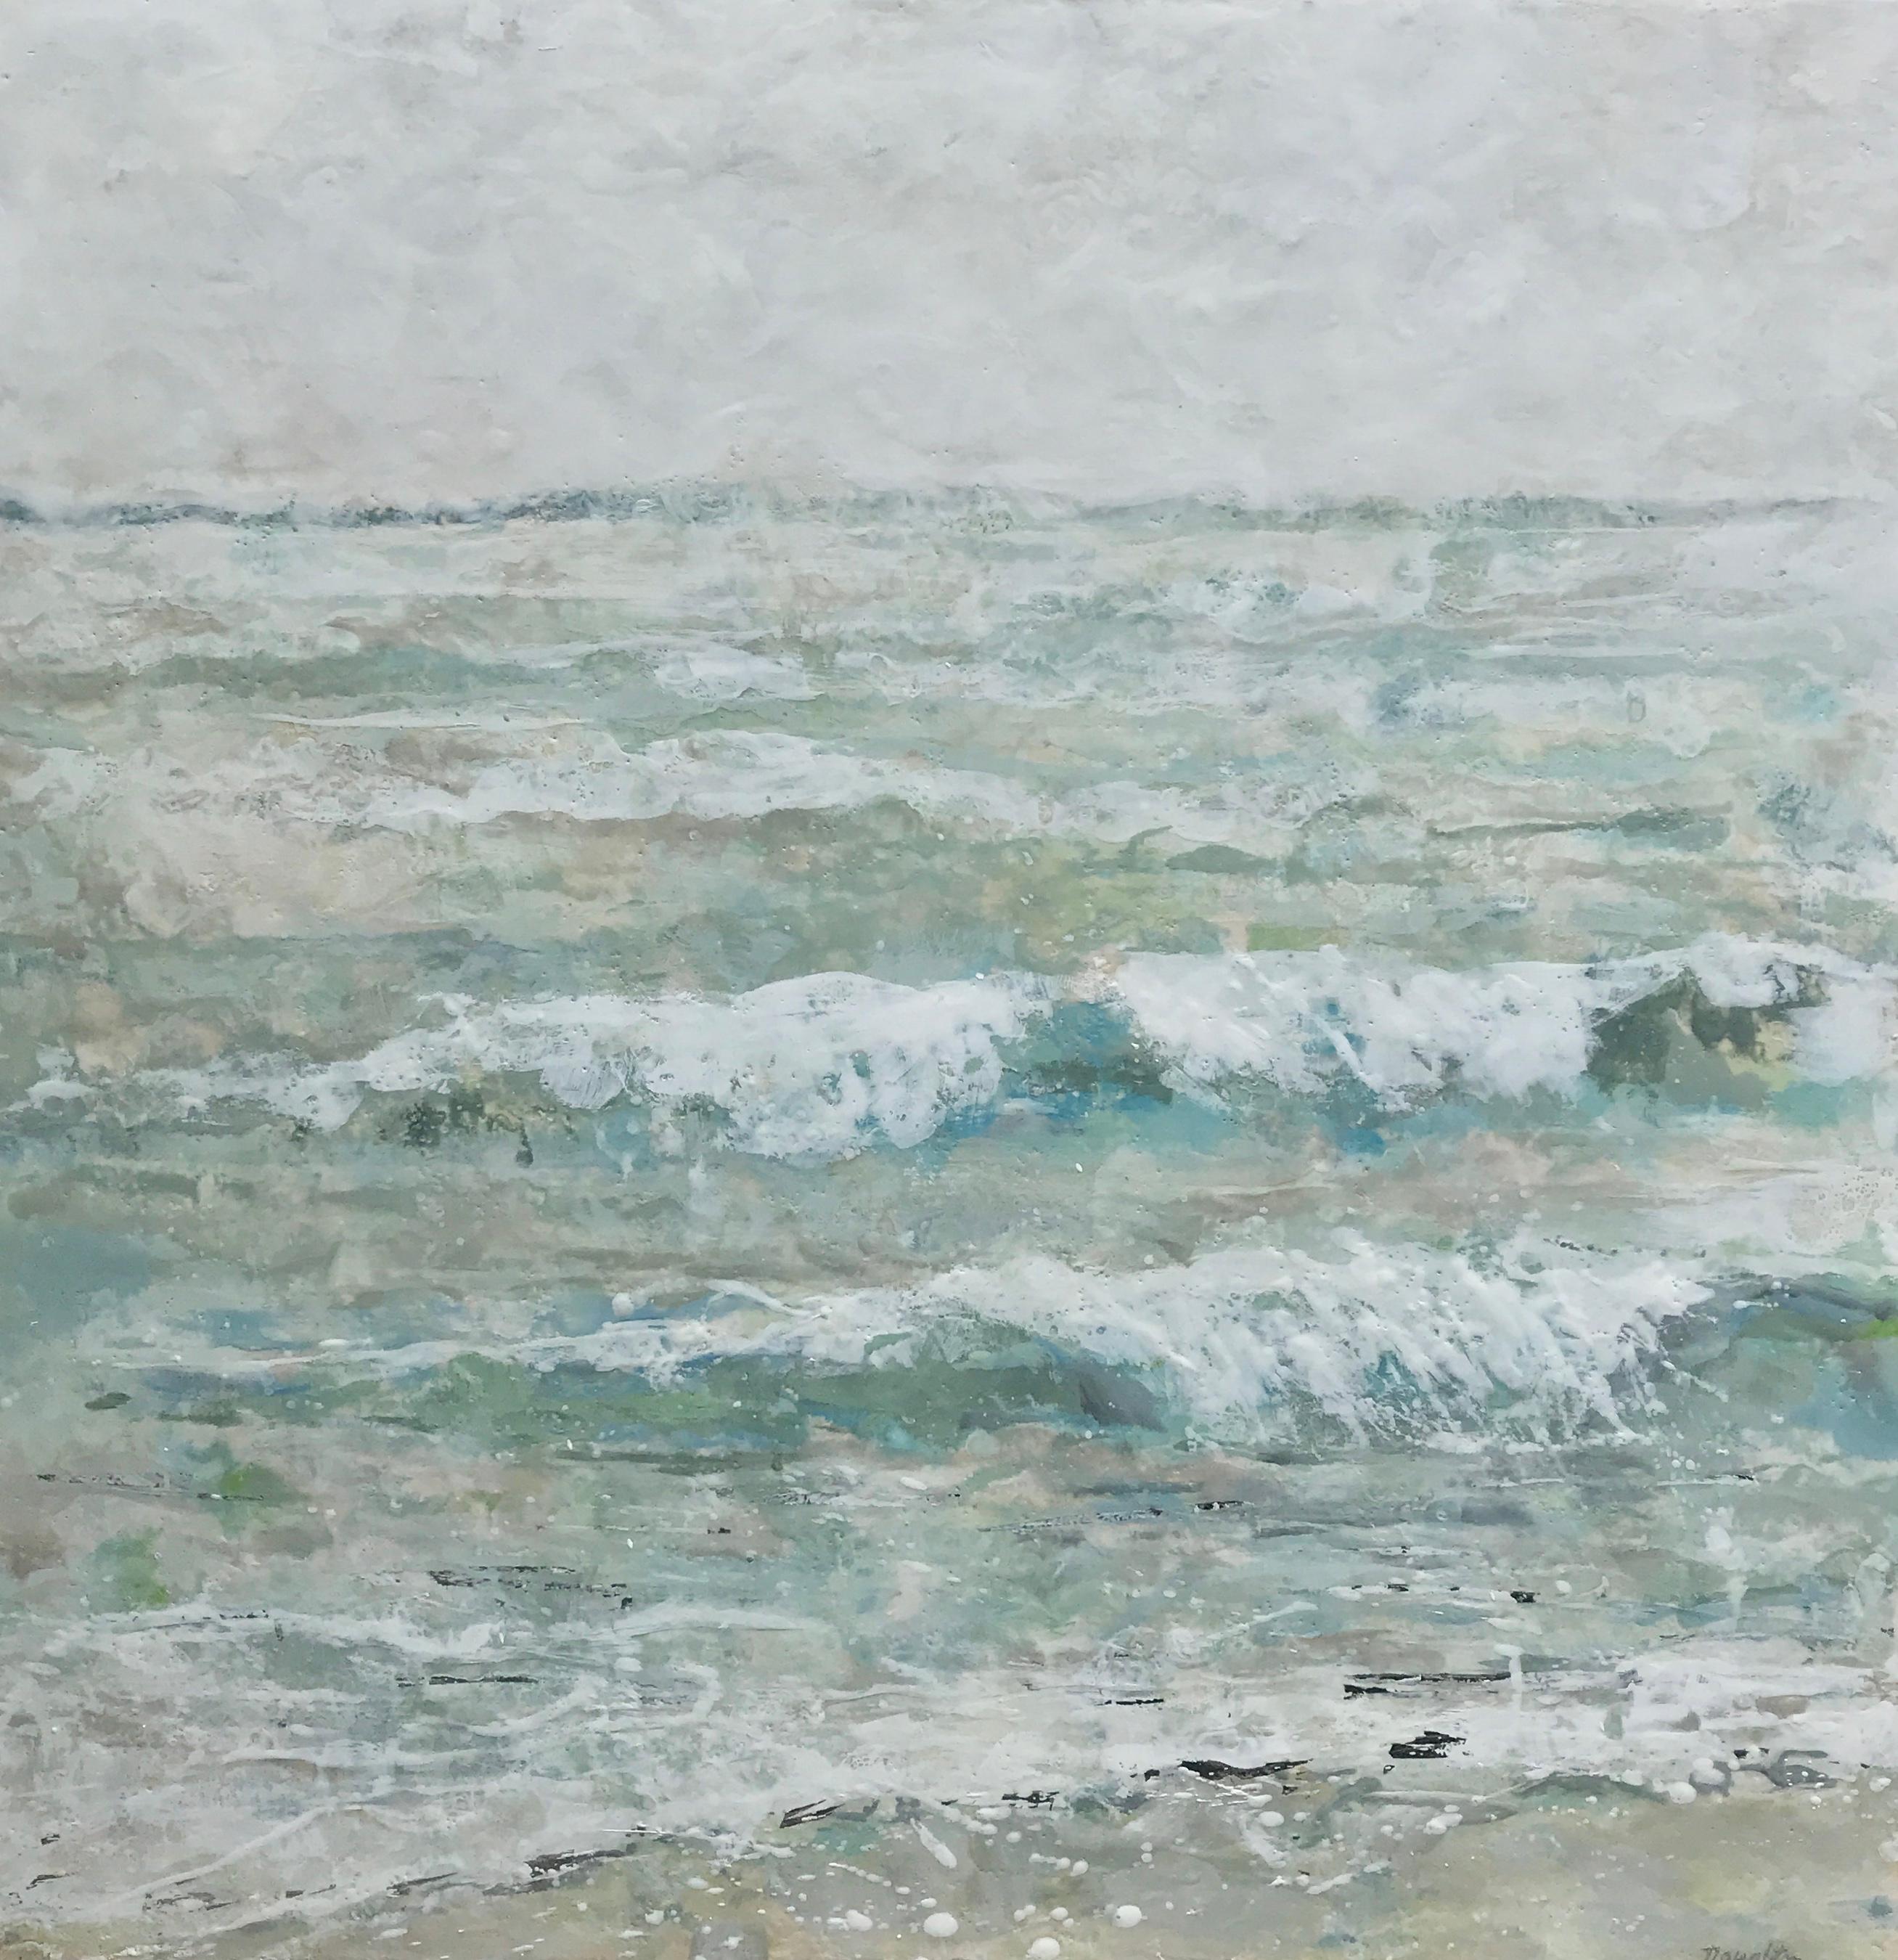 'Tide Line' is a framed encaustic on board painting created by American artist Maureen Naughton in 2019. Featuring a soft palette mostly made of blue, green, white, and grey tones, the painting depicts a seashore accented with small waves crashing